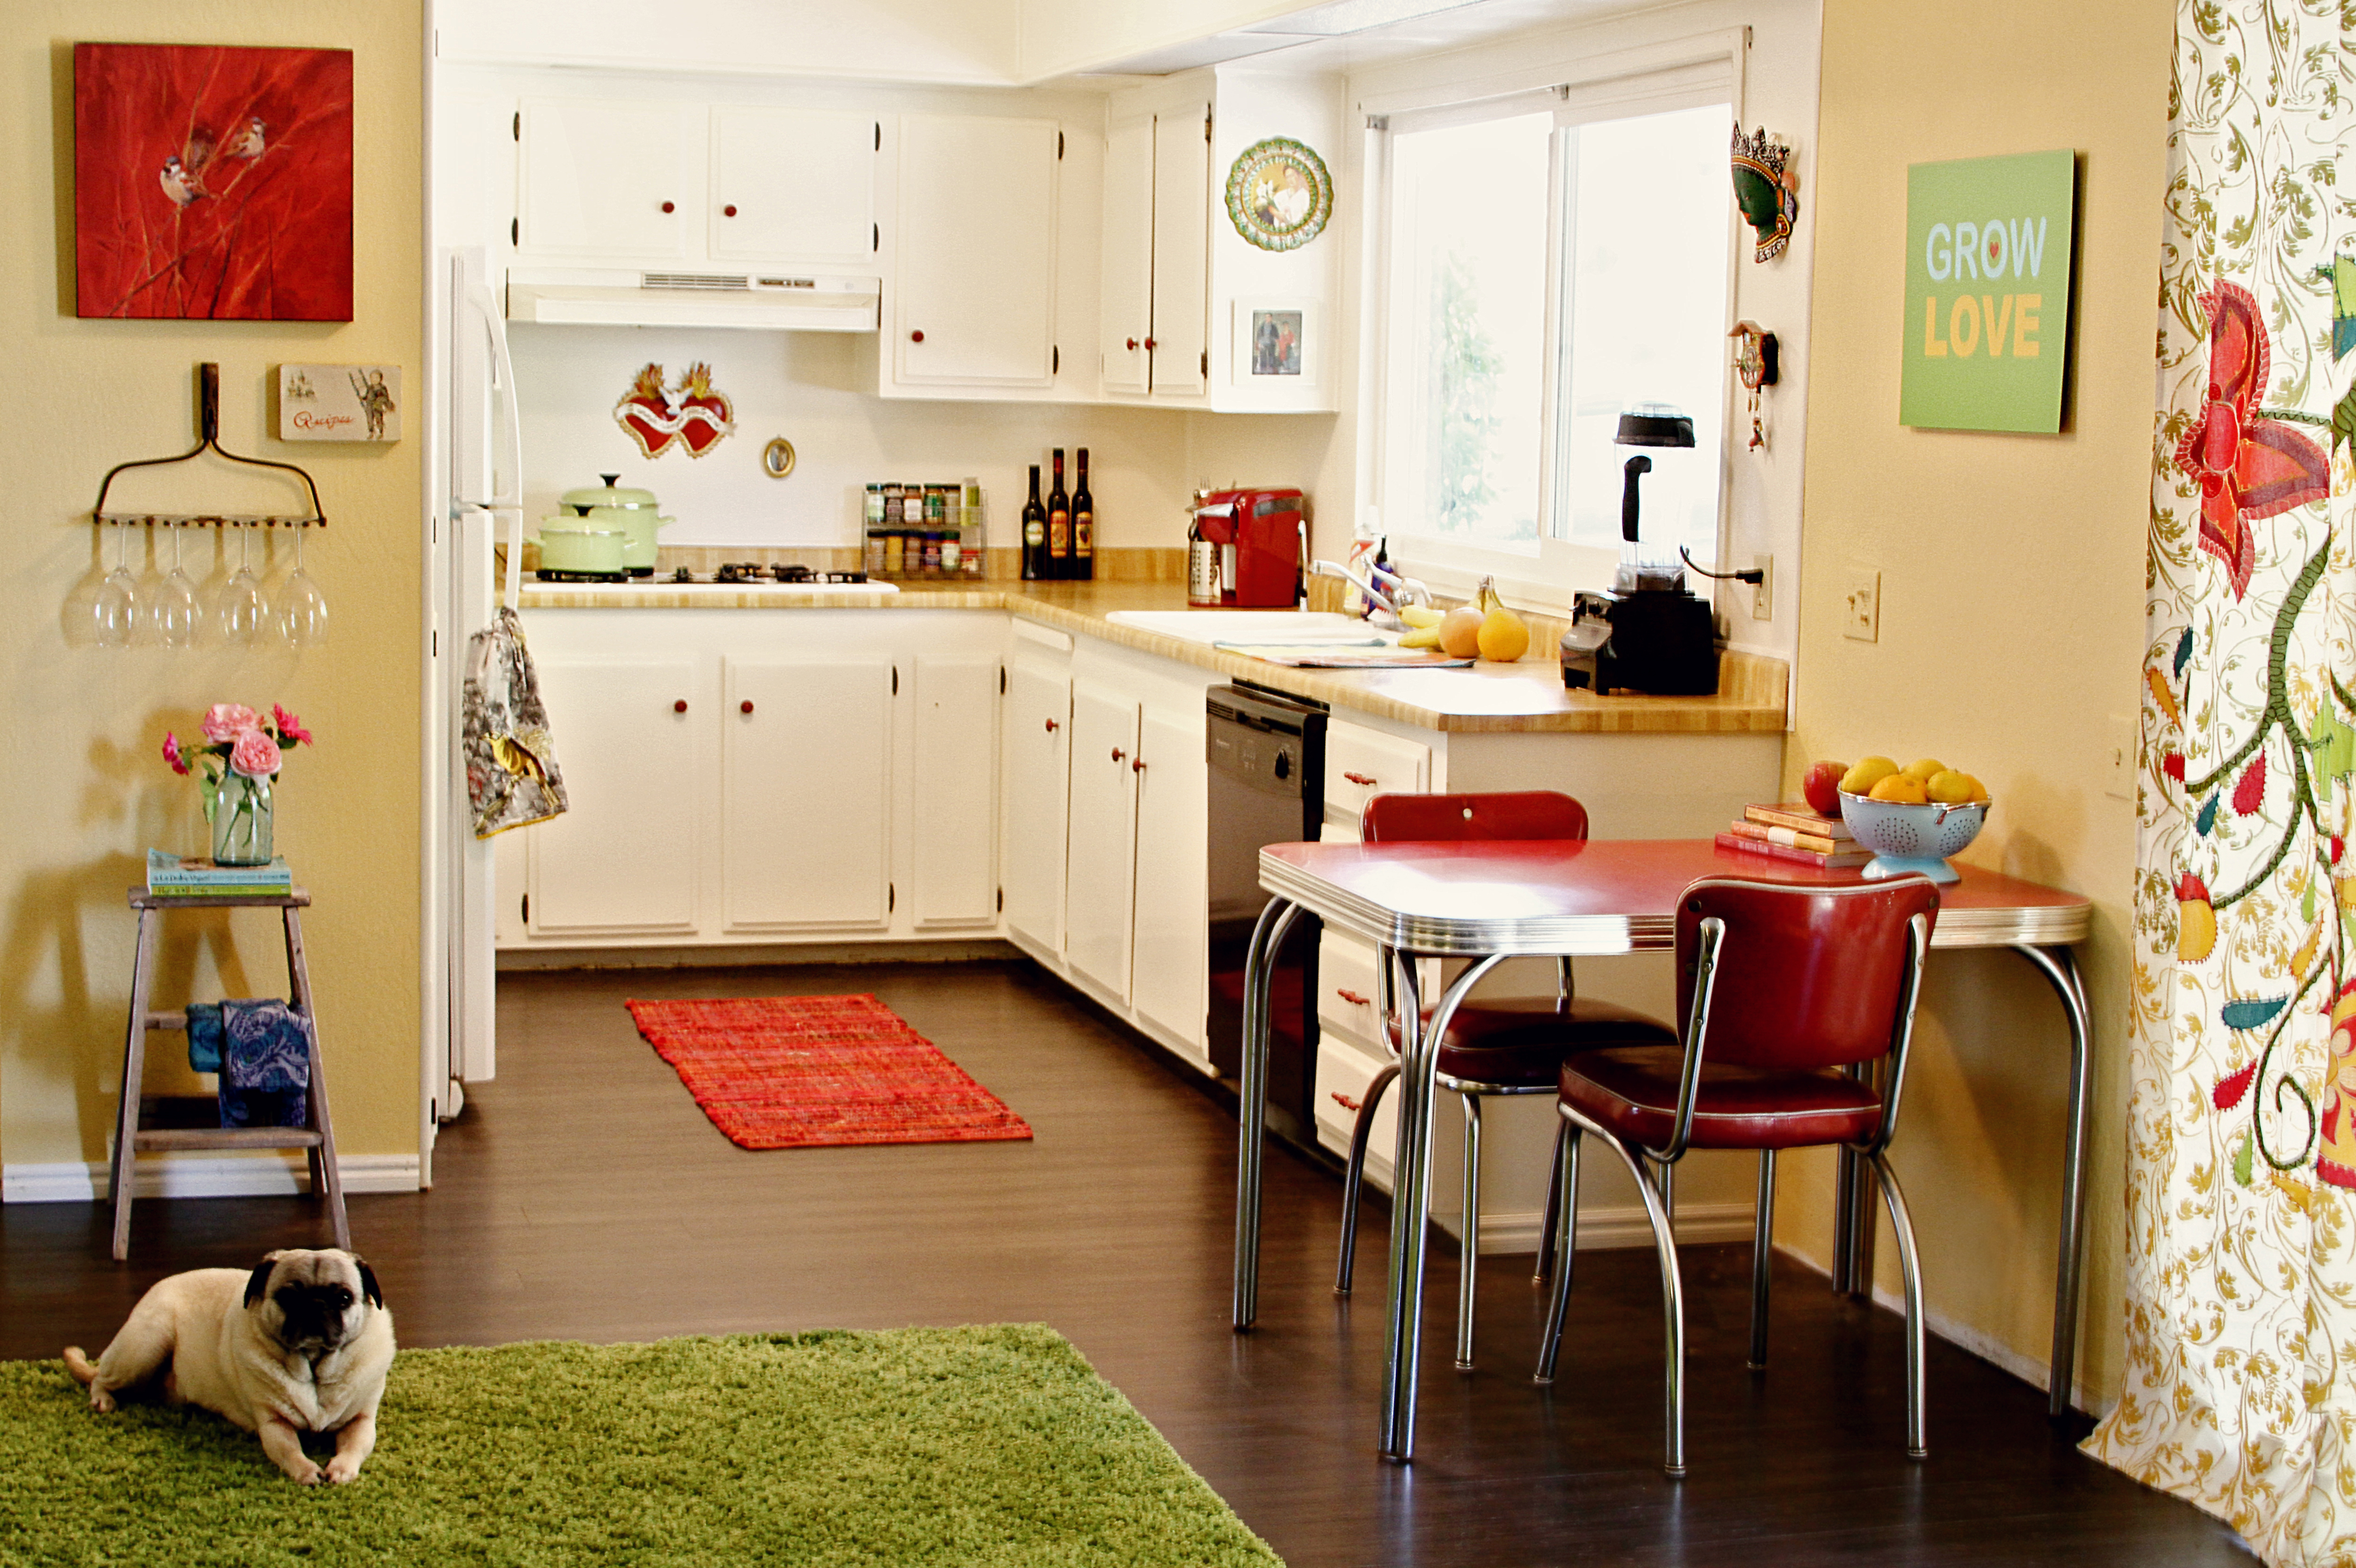 10 Kitchen Decor Ideas for Your Mobile Home Rental